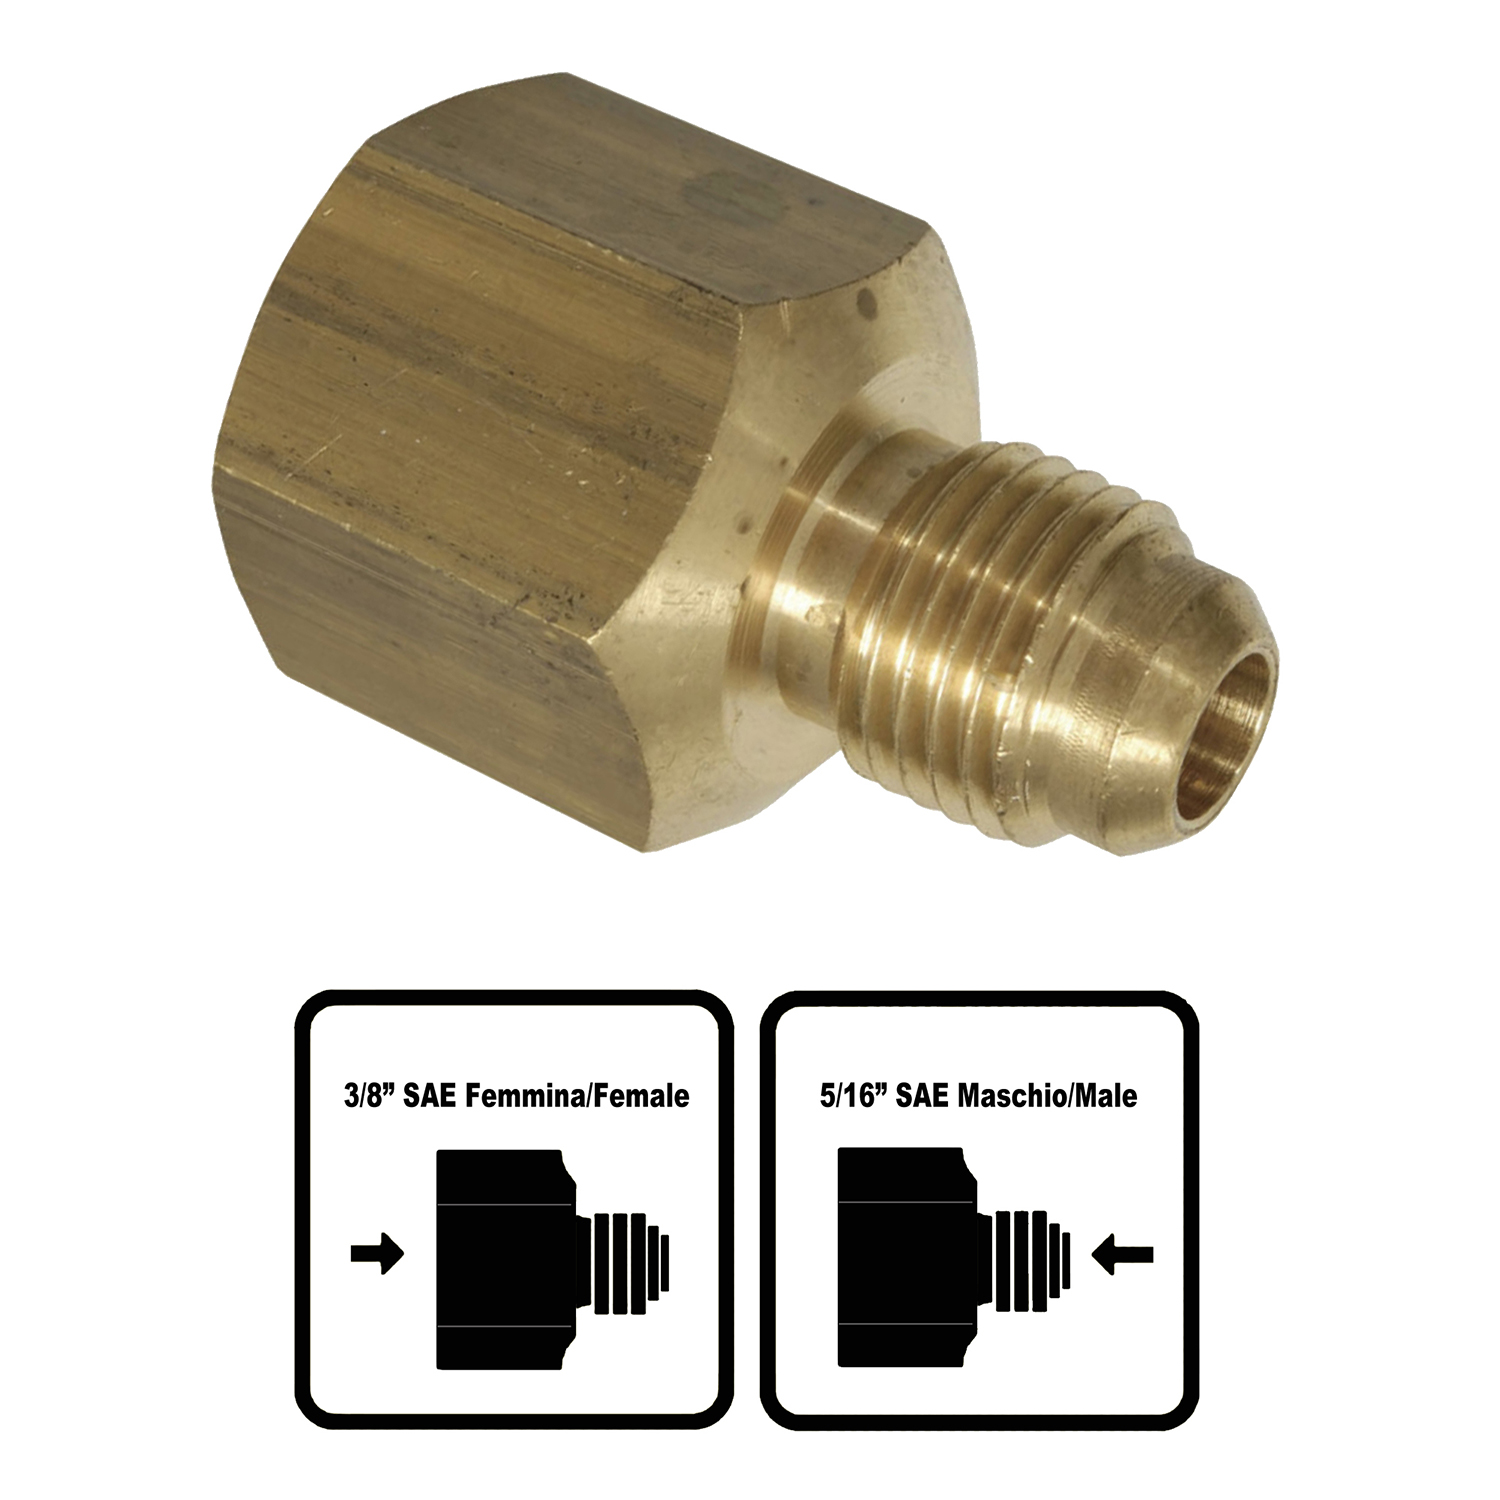 Adapter for Fieldpiece vacuum pumps - from 3/8 SAE female to 5/16 SAE male